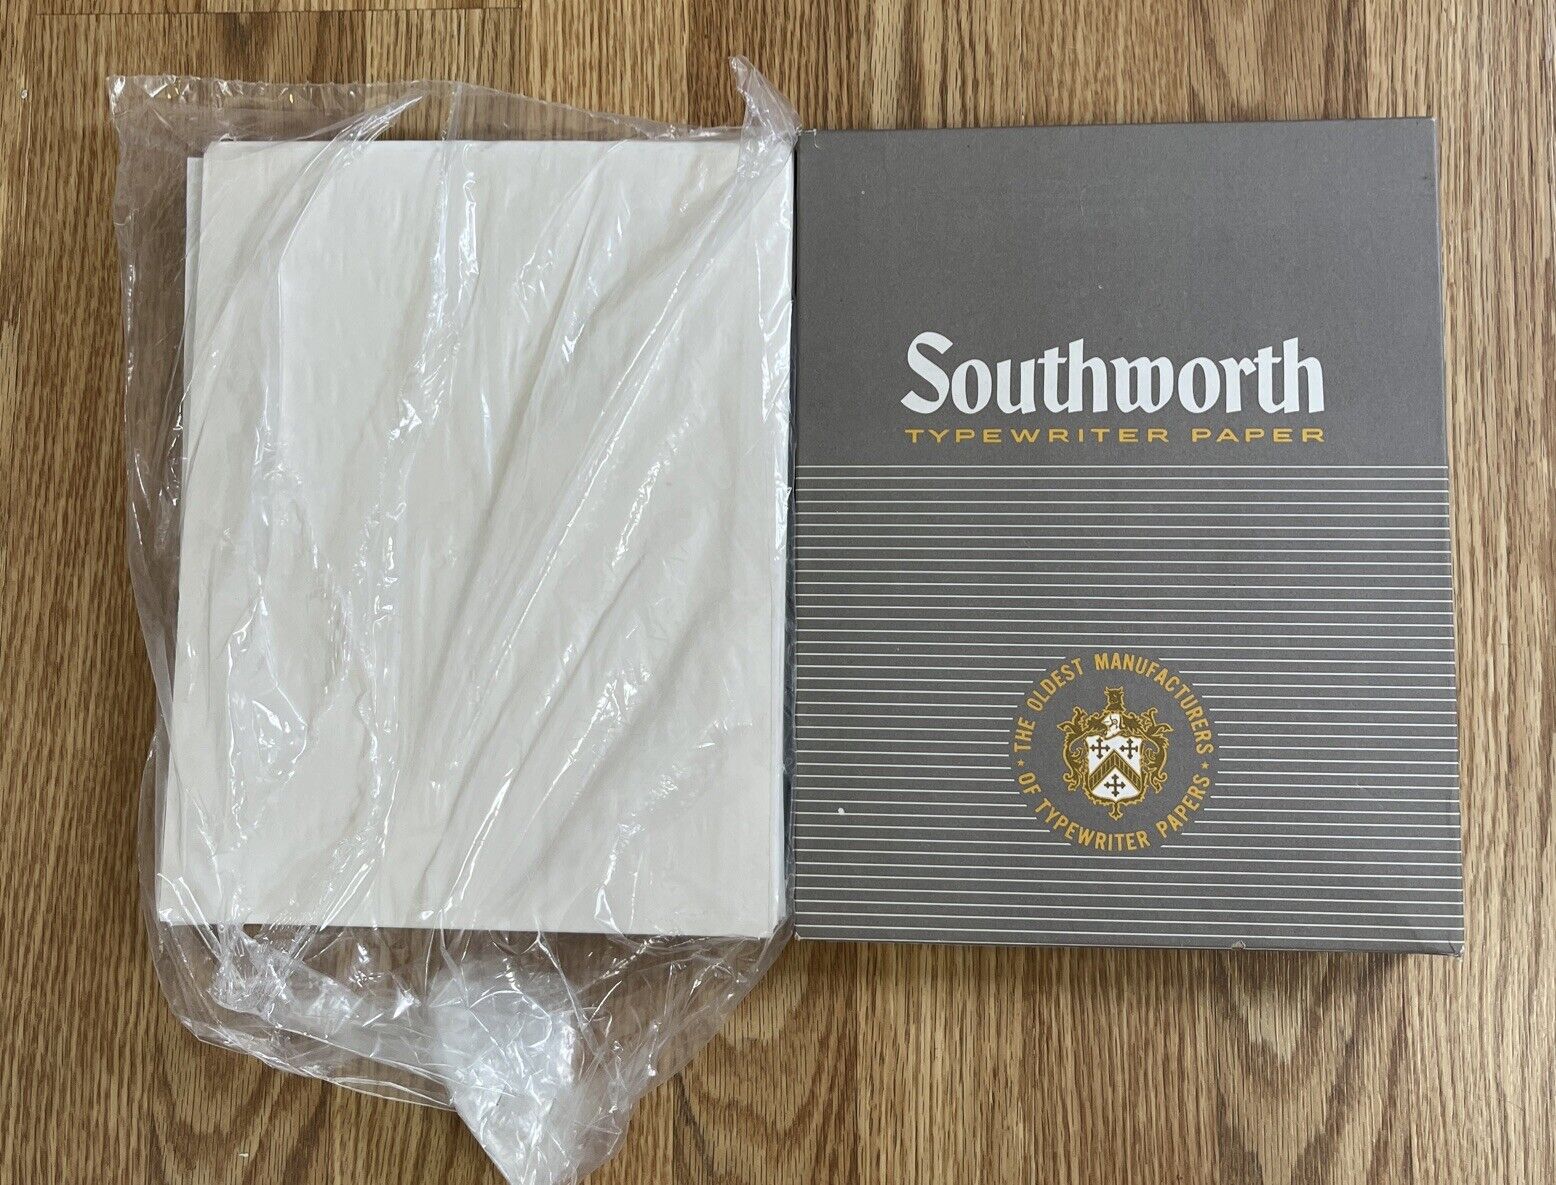 Vintage Southworth Typewriter Paper Box 8.5”x11” Size Paper, Approx 1000+ Sheets